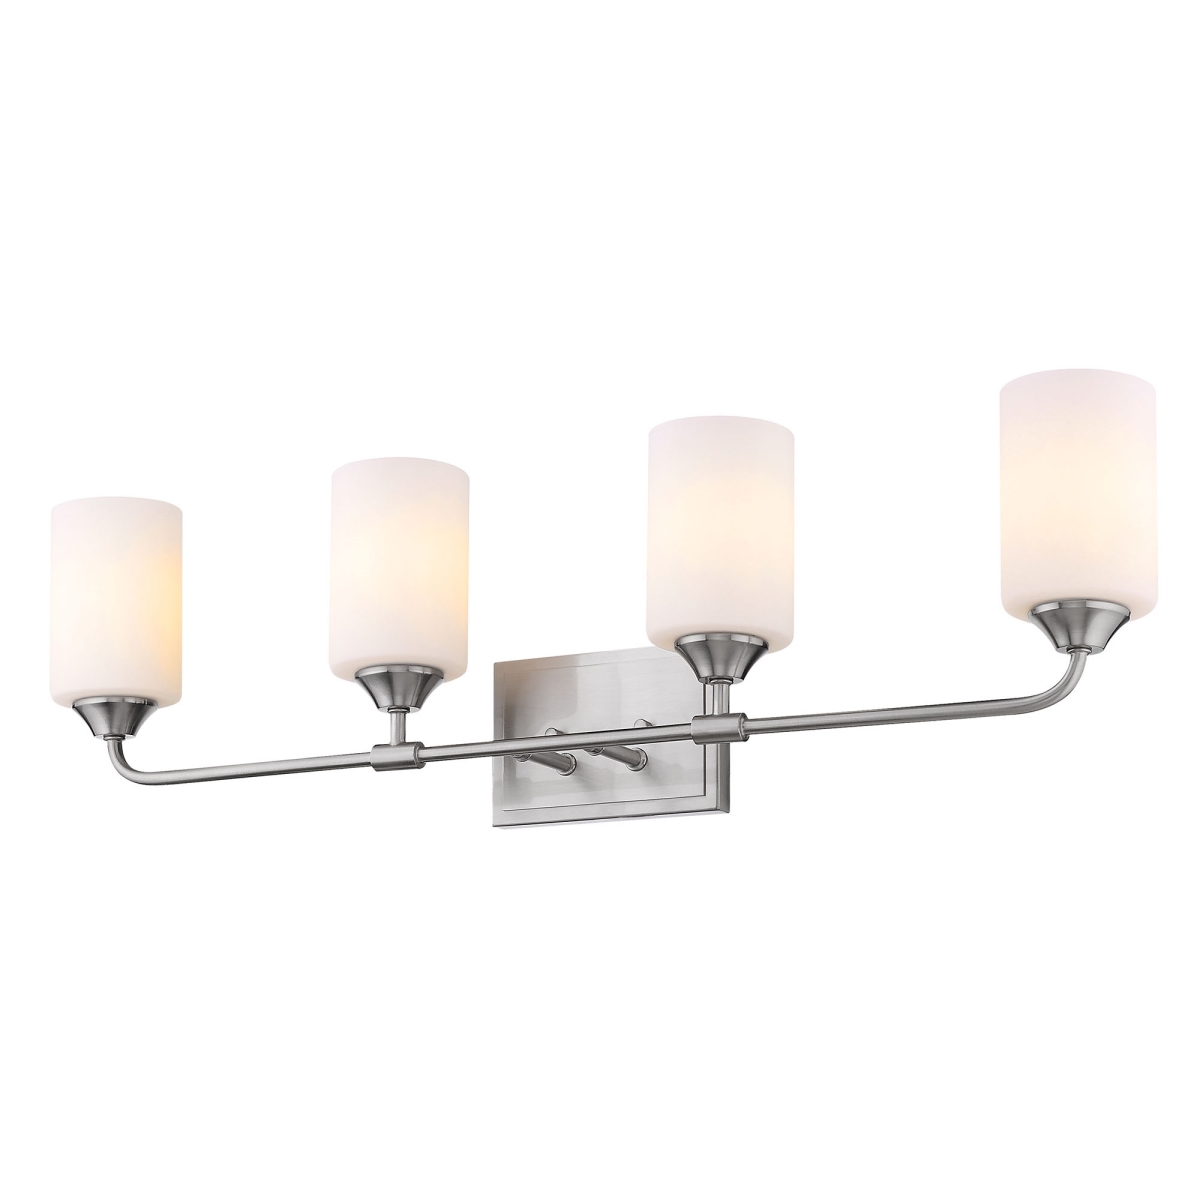 2120-ba4 Pw-cyl-op Ormond 4 Light Bath Vanity In Pewter With Cylindrical Opal Glass Shade